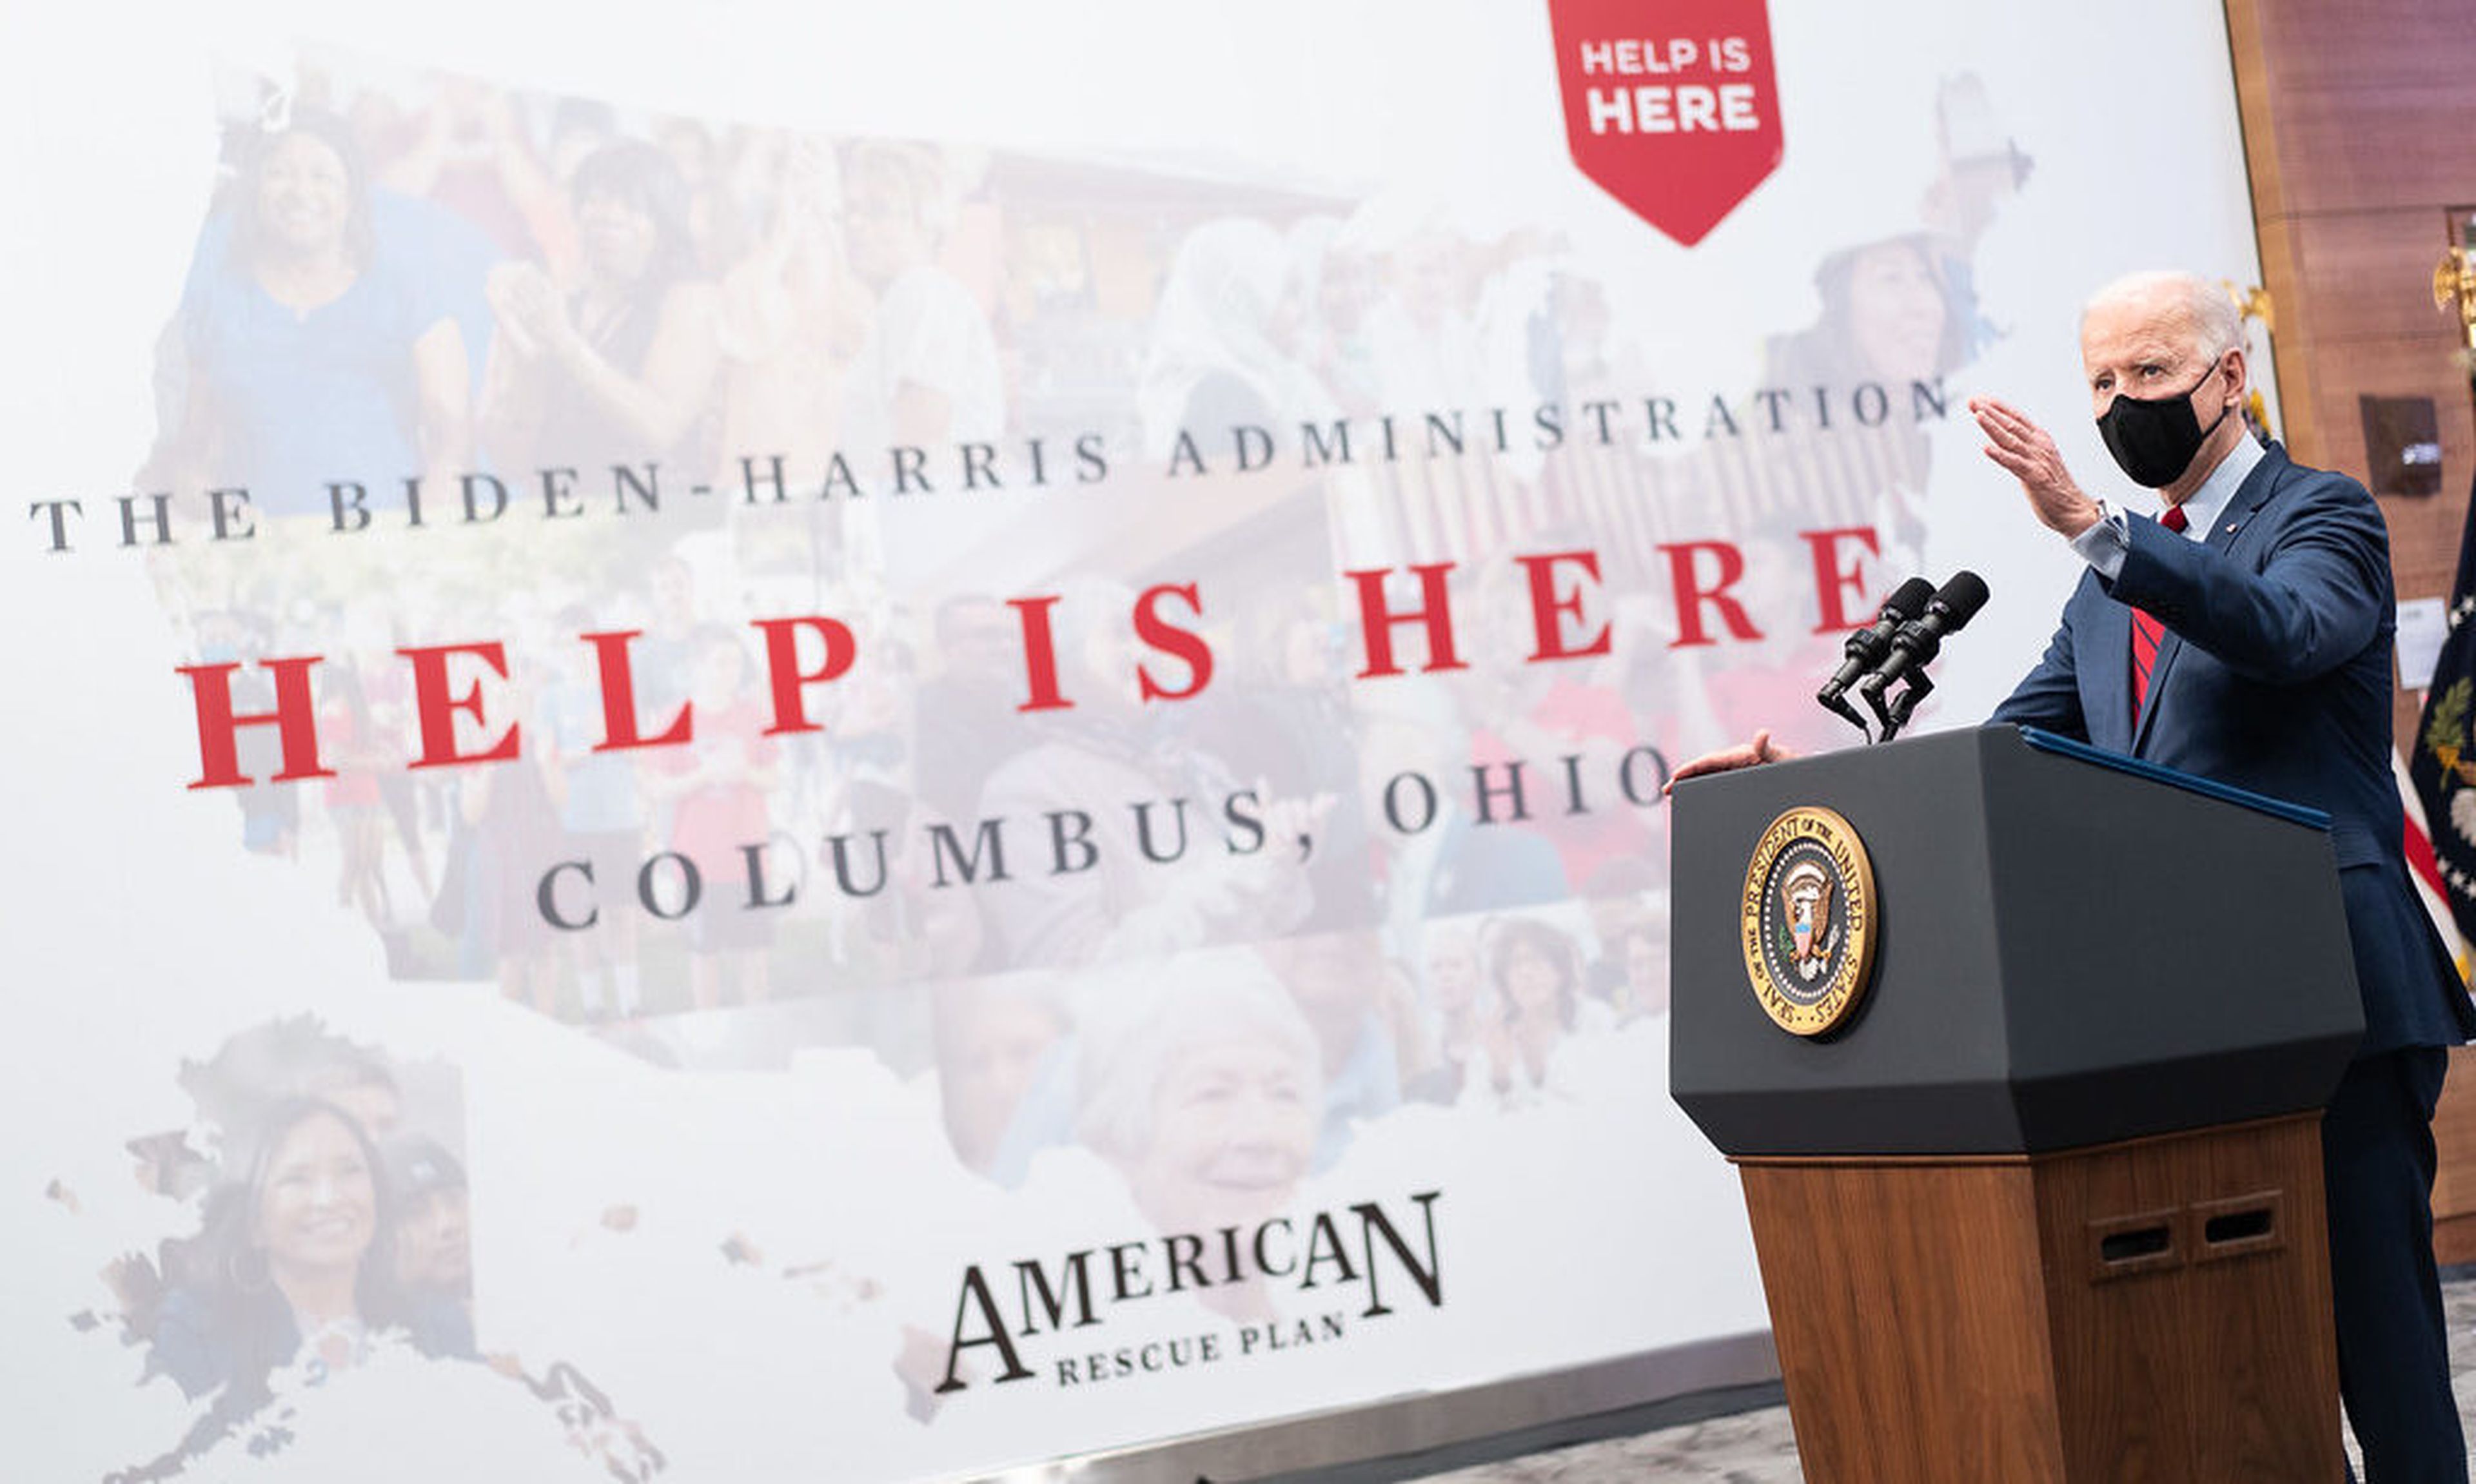 President Joe Biden delivers remarks March 23, 2021, at the Arthur James Cancer Hospital and the Richard Solove Research Institute in Columbus, Ohio. (Official White House Photo by Adam Schultz)